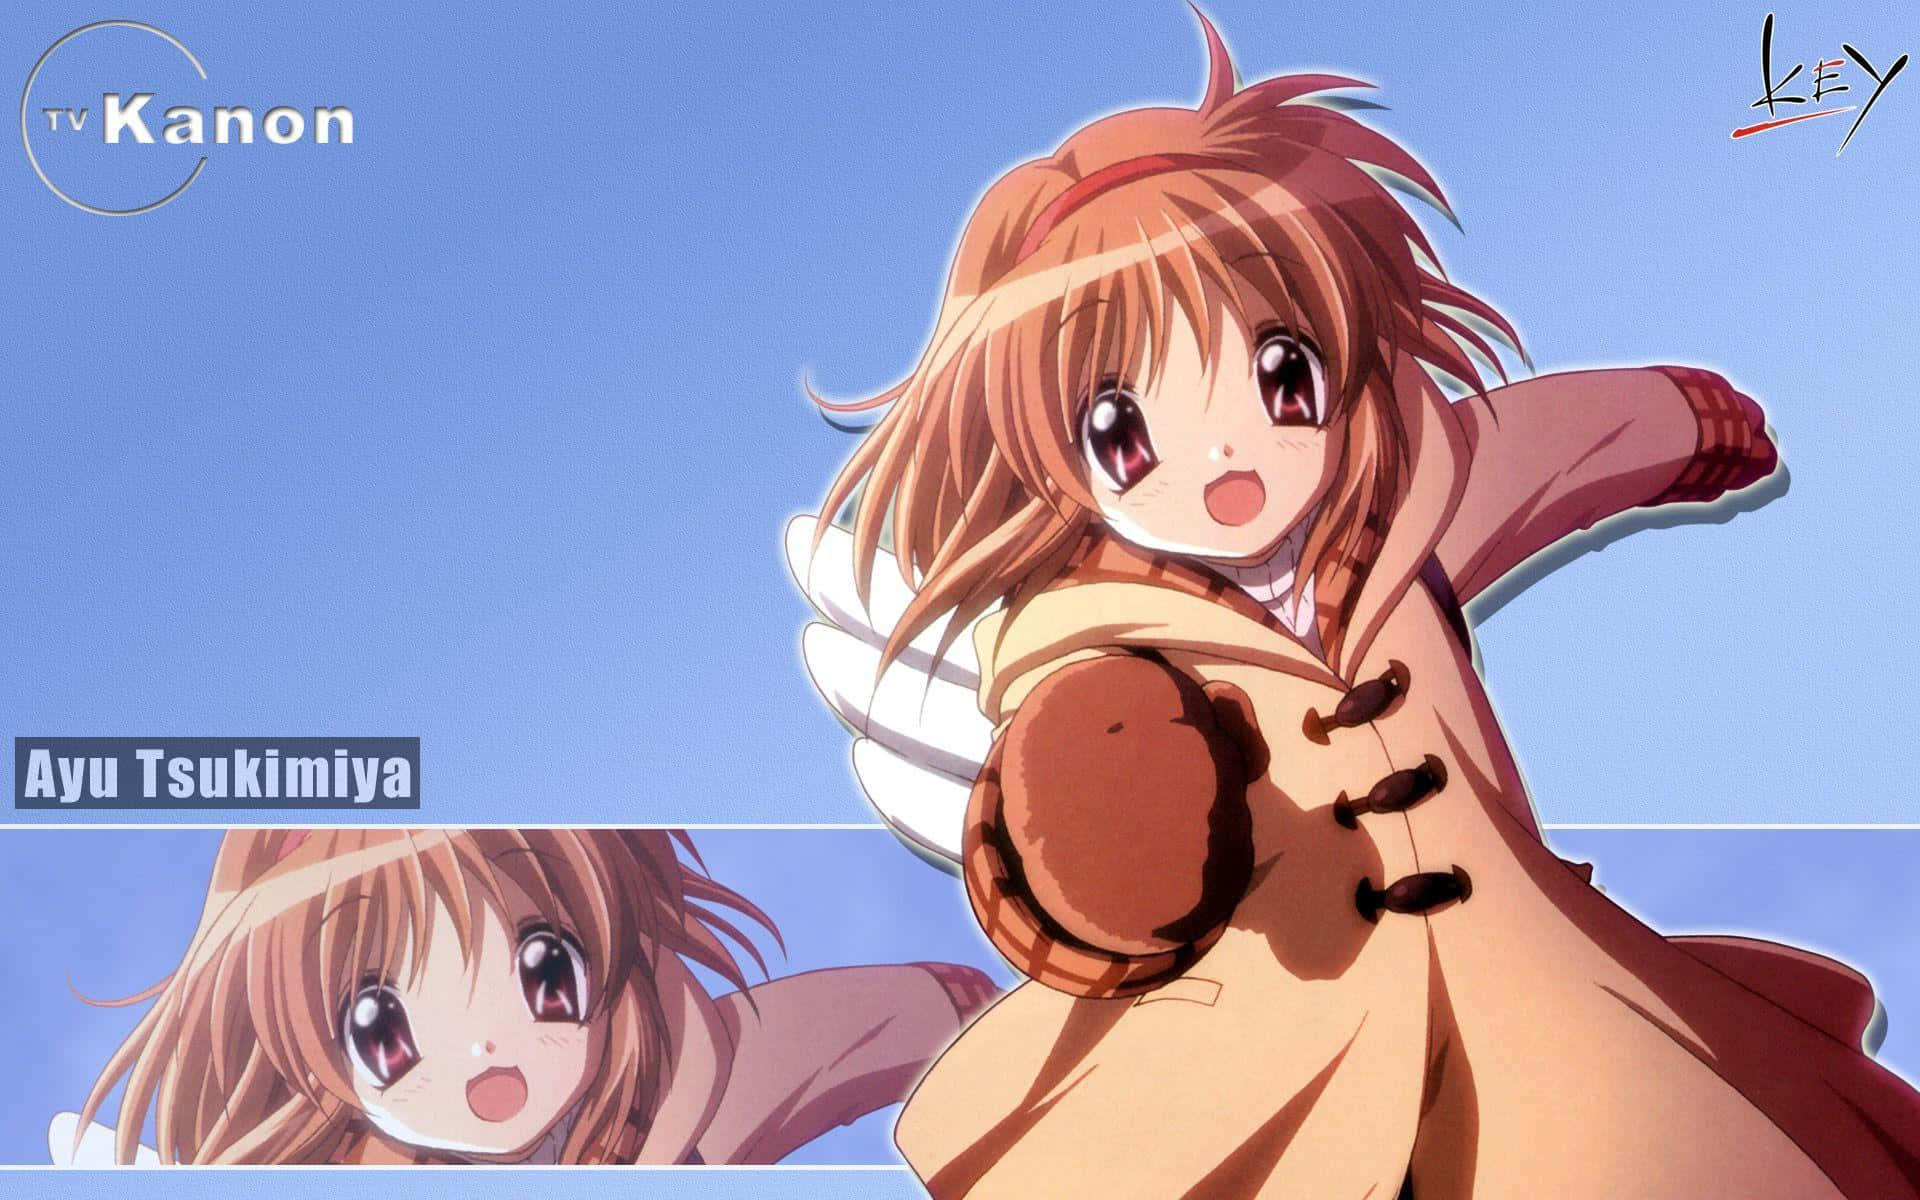 Kanon reference in Air TV | Anime, 2000s art, Kyoto animation